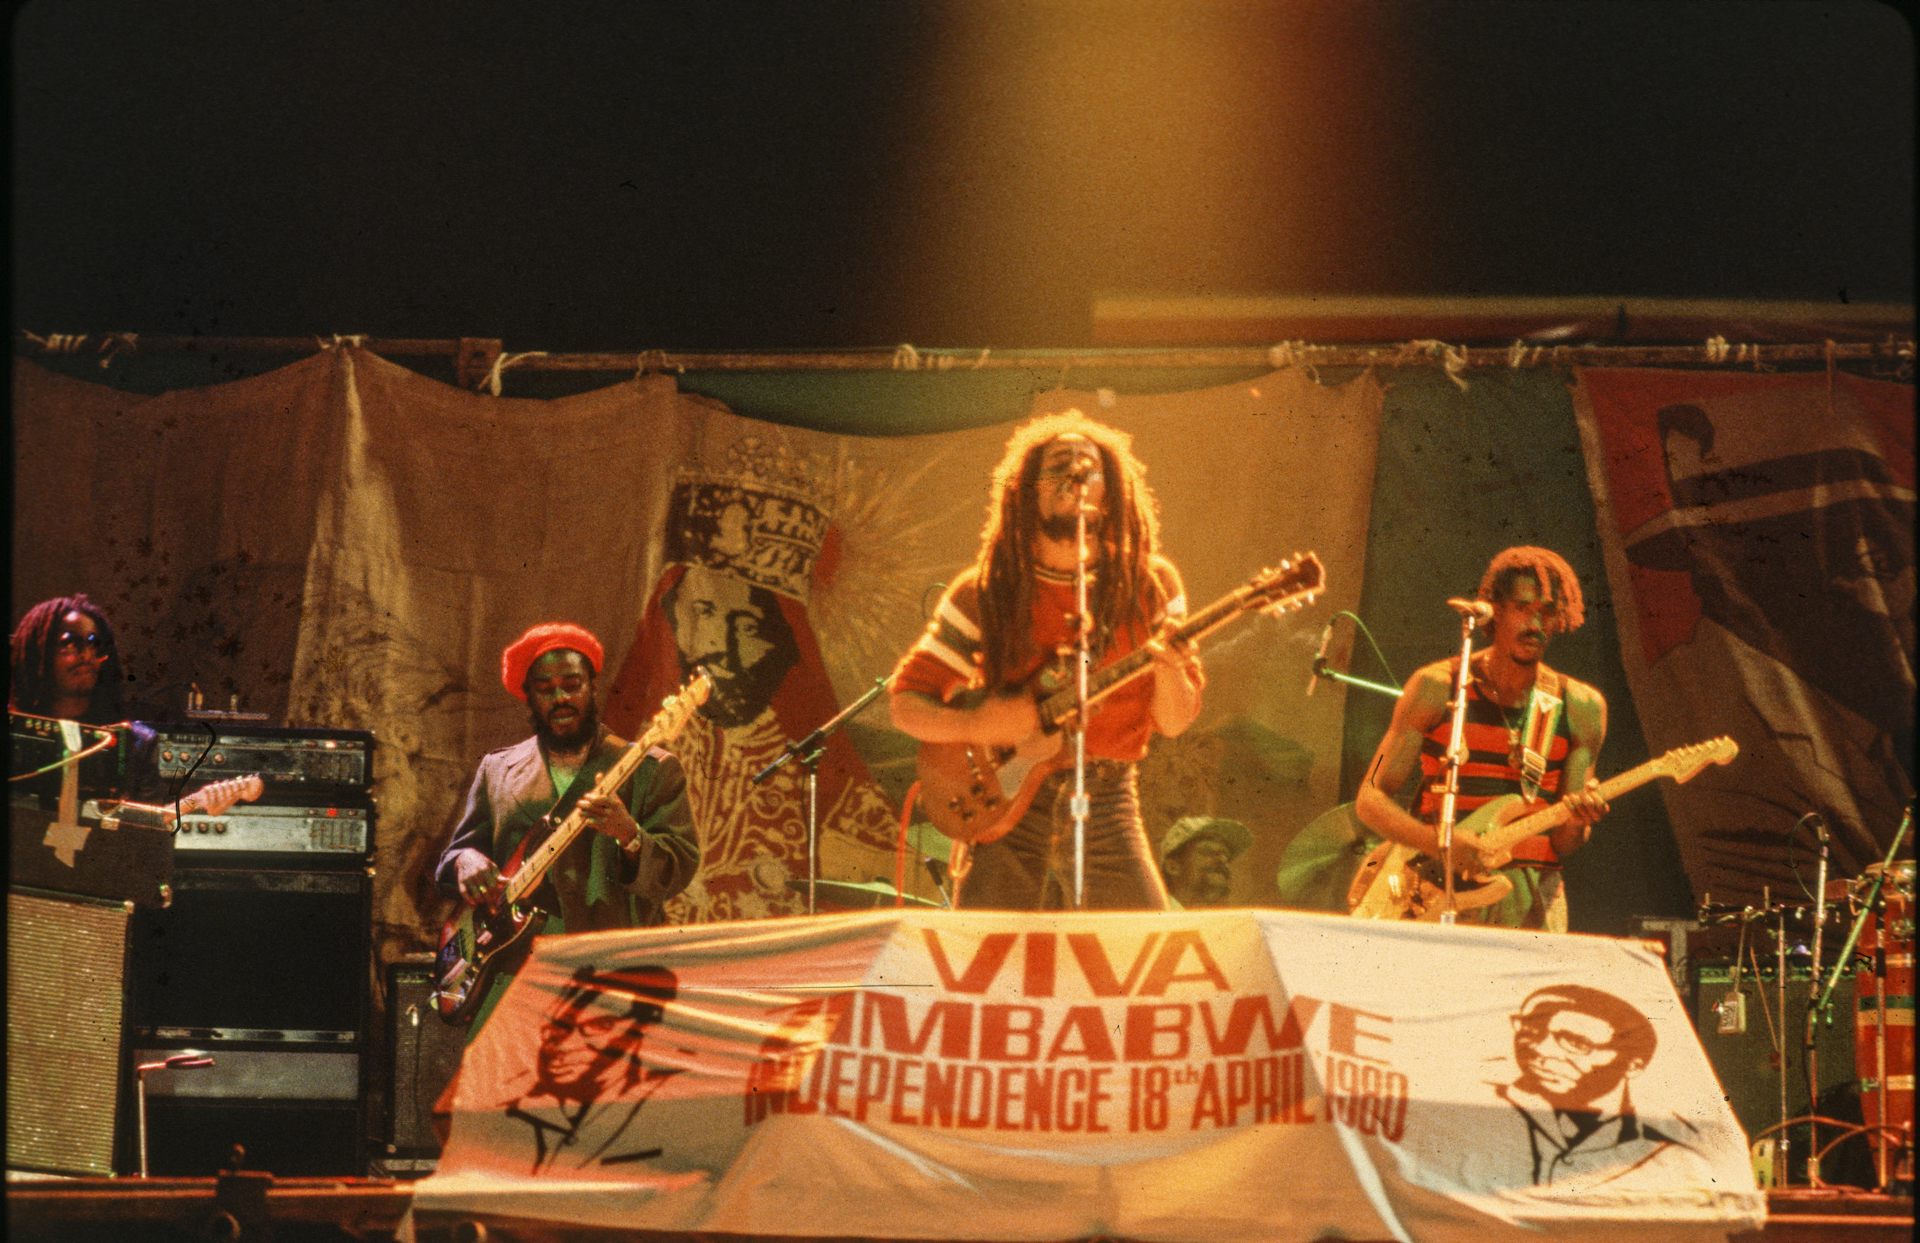 From Rebel to Retail − Inside Bob Marley’s Posthumous Musical and Merchandising Empire